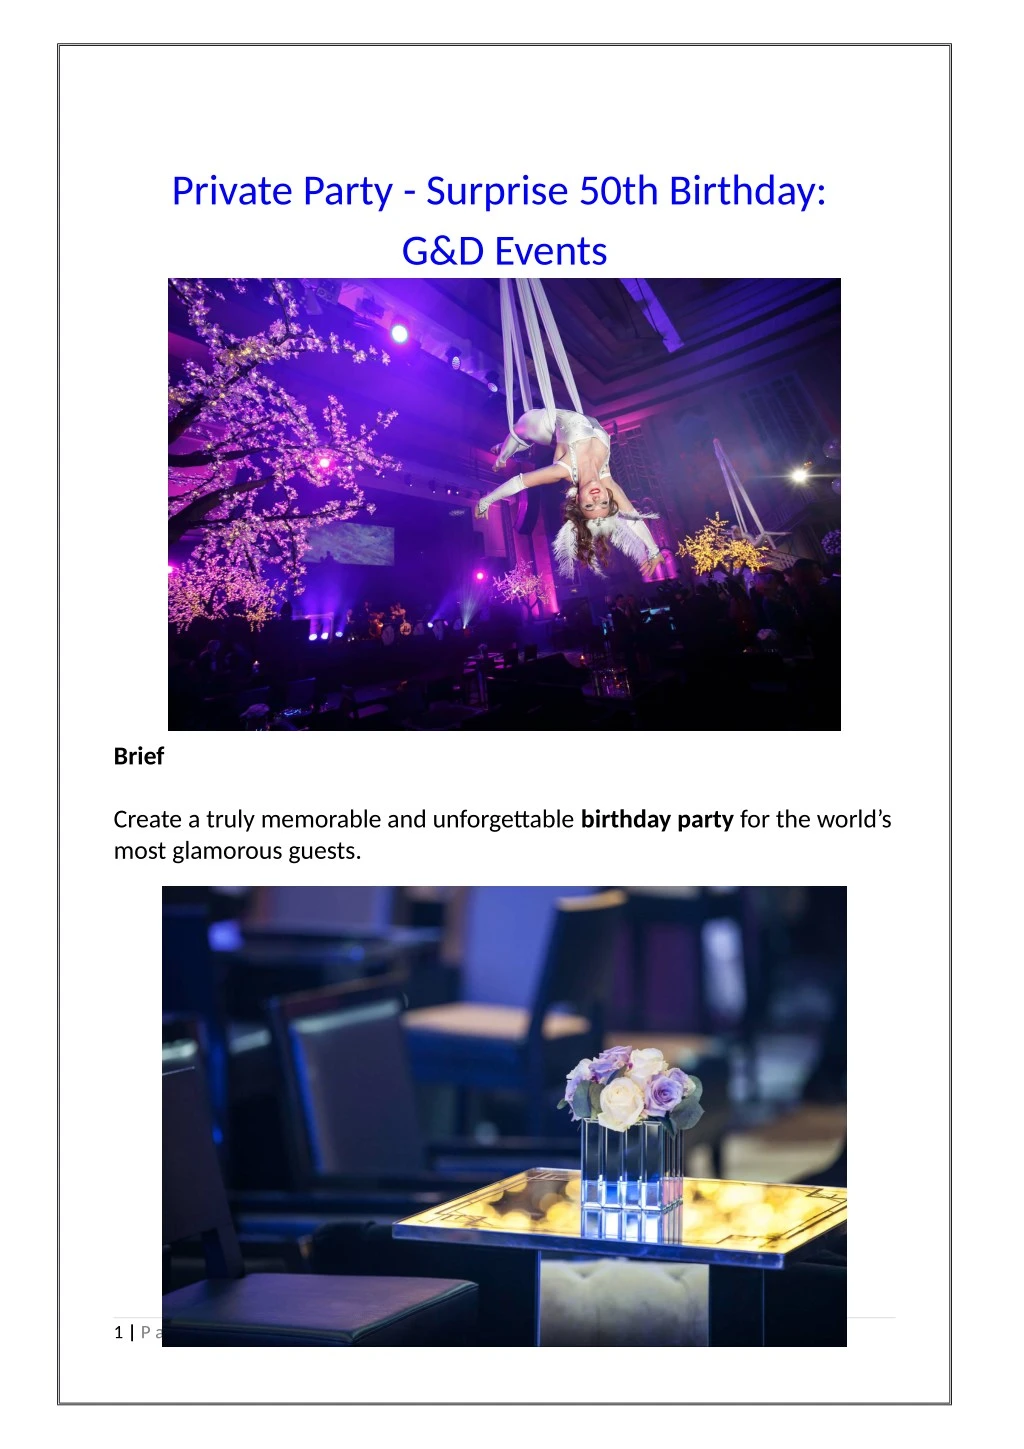 private party surprise 50th birthday g d events